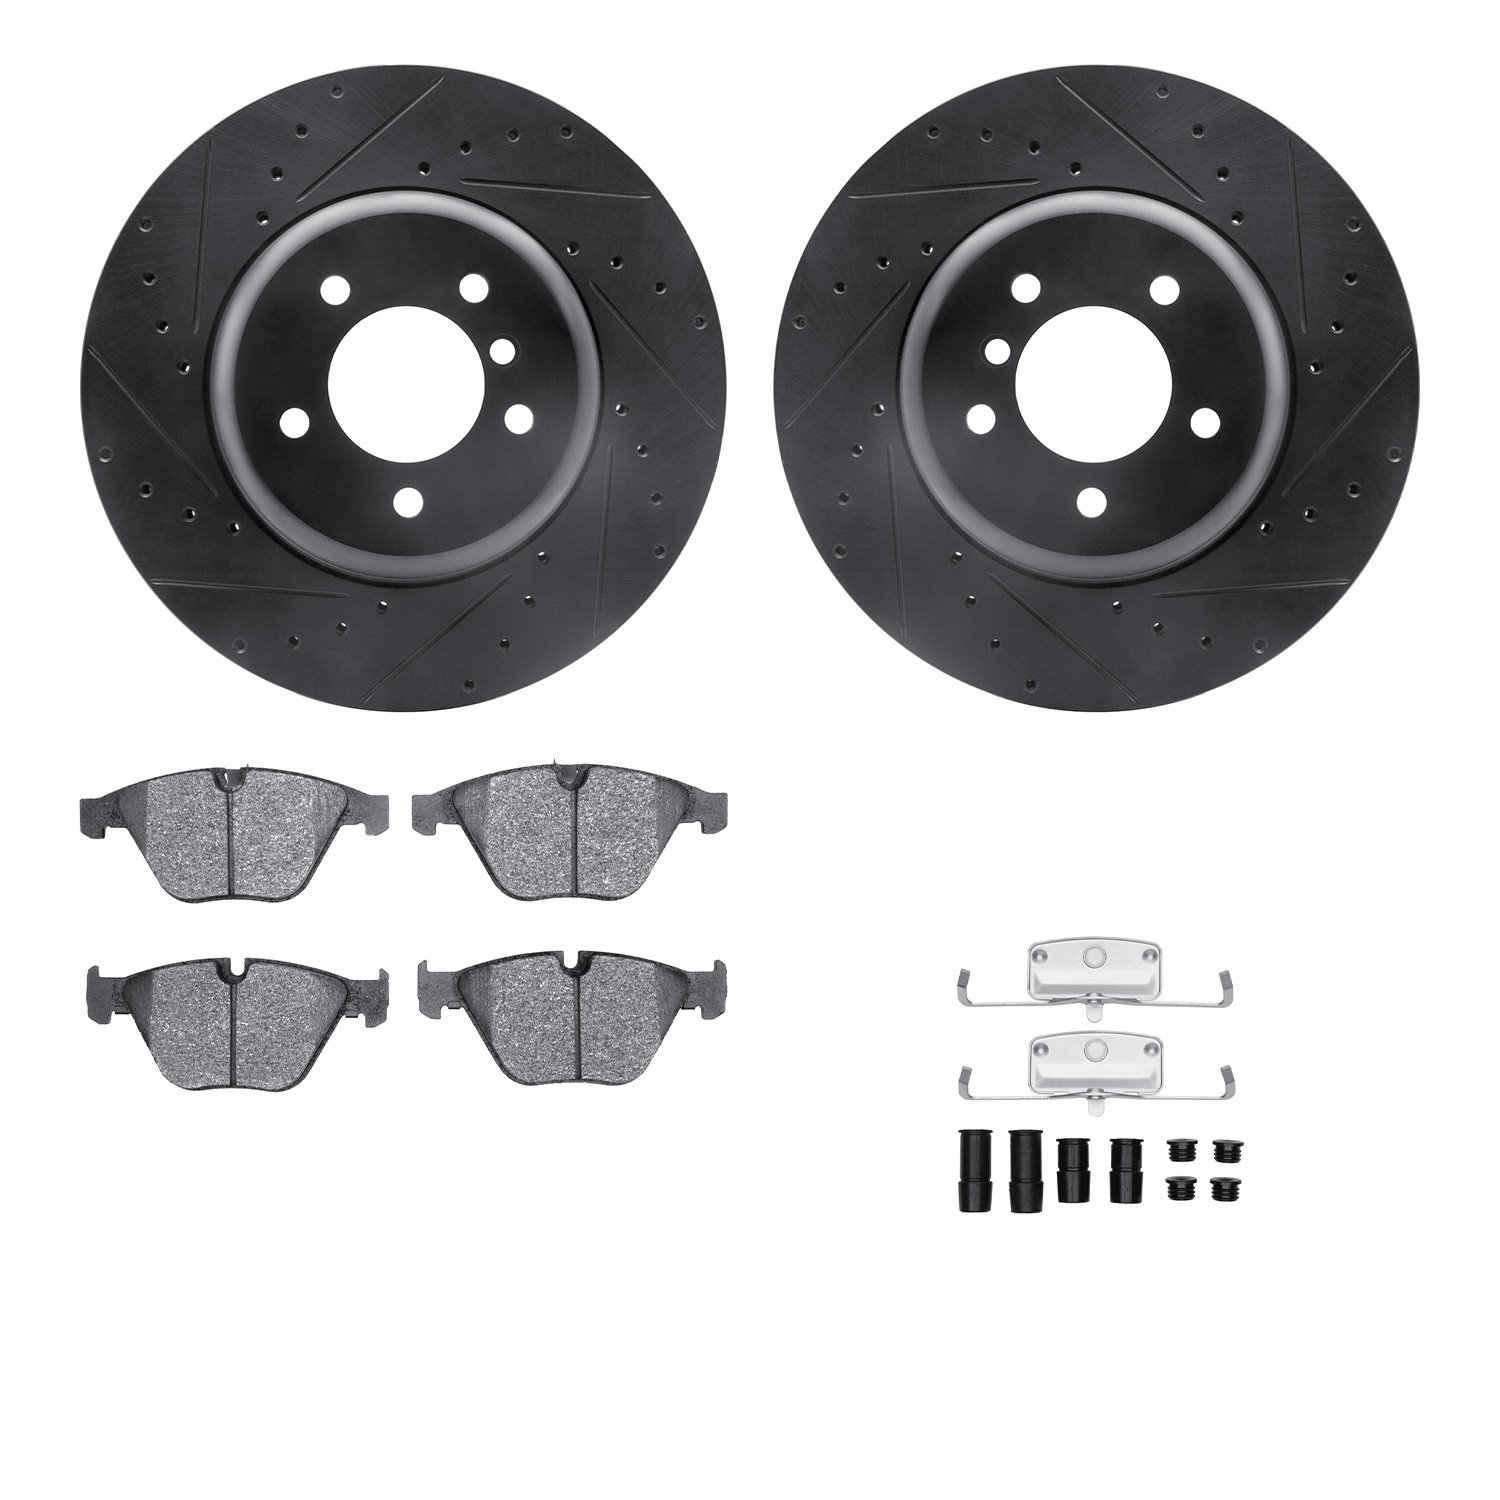 8312-31071 Drilled/Slotted Brake Rotors with 3000-Series Ceramic Brake Pads Kit & Hardware [Black], 2011-2016 BMW, Position: Fro